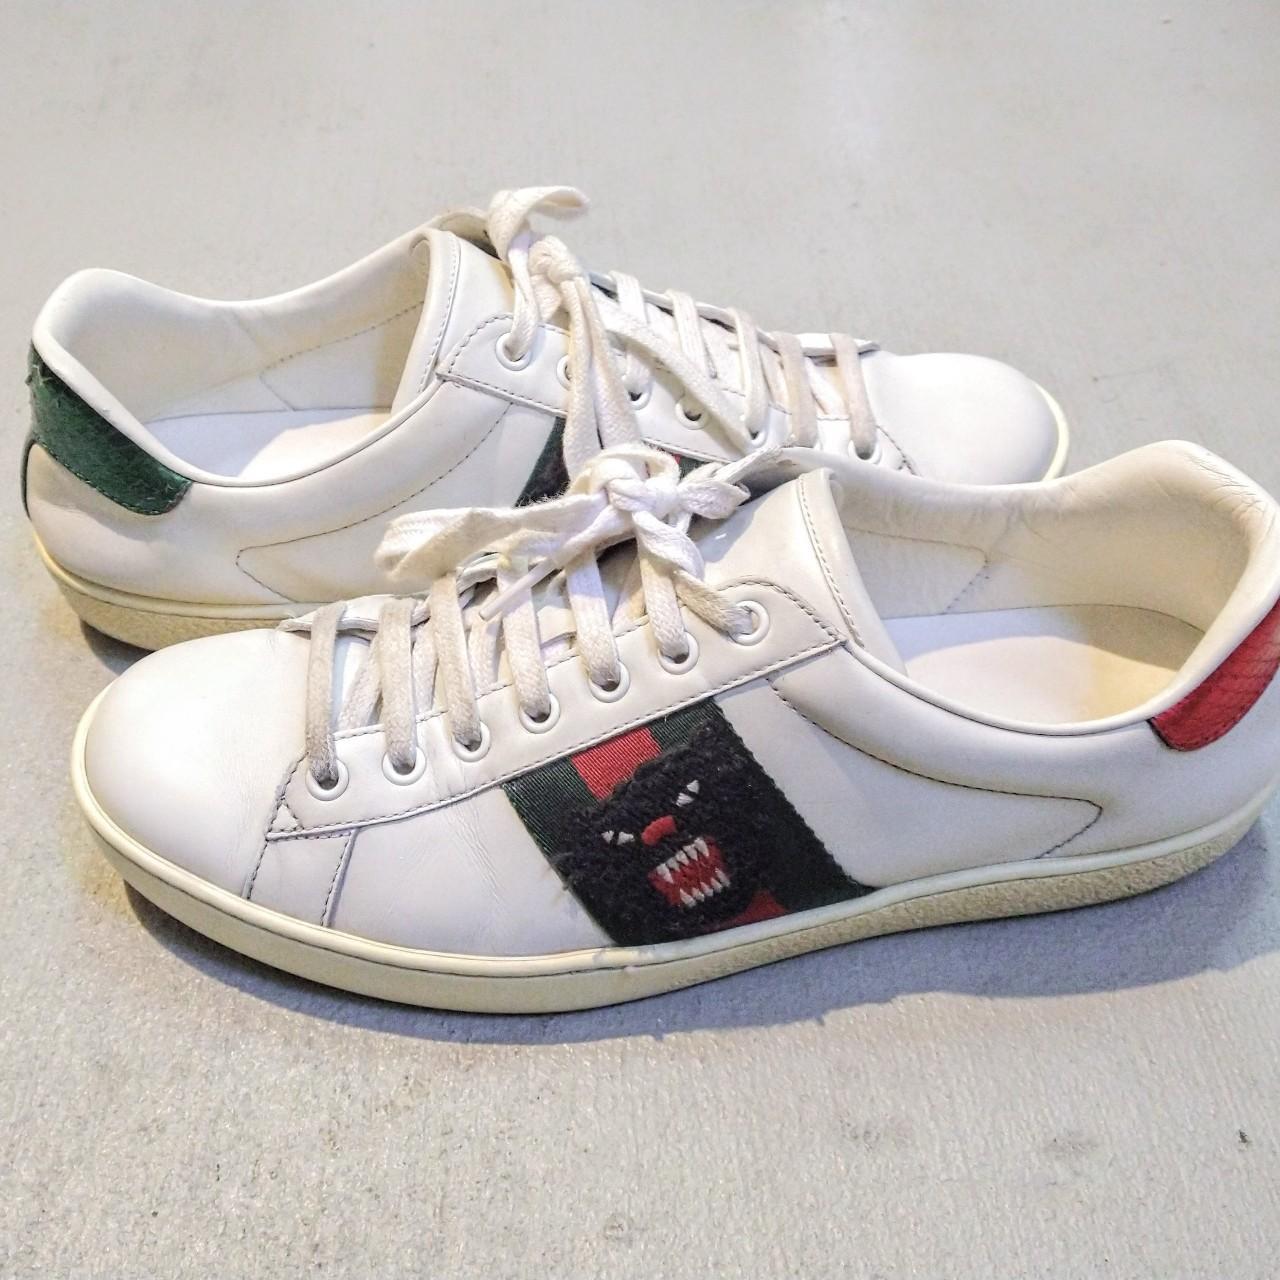 Gucci Ace Panther Sneakers 457131 100%... - Depop